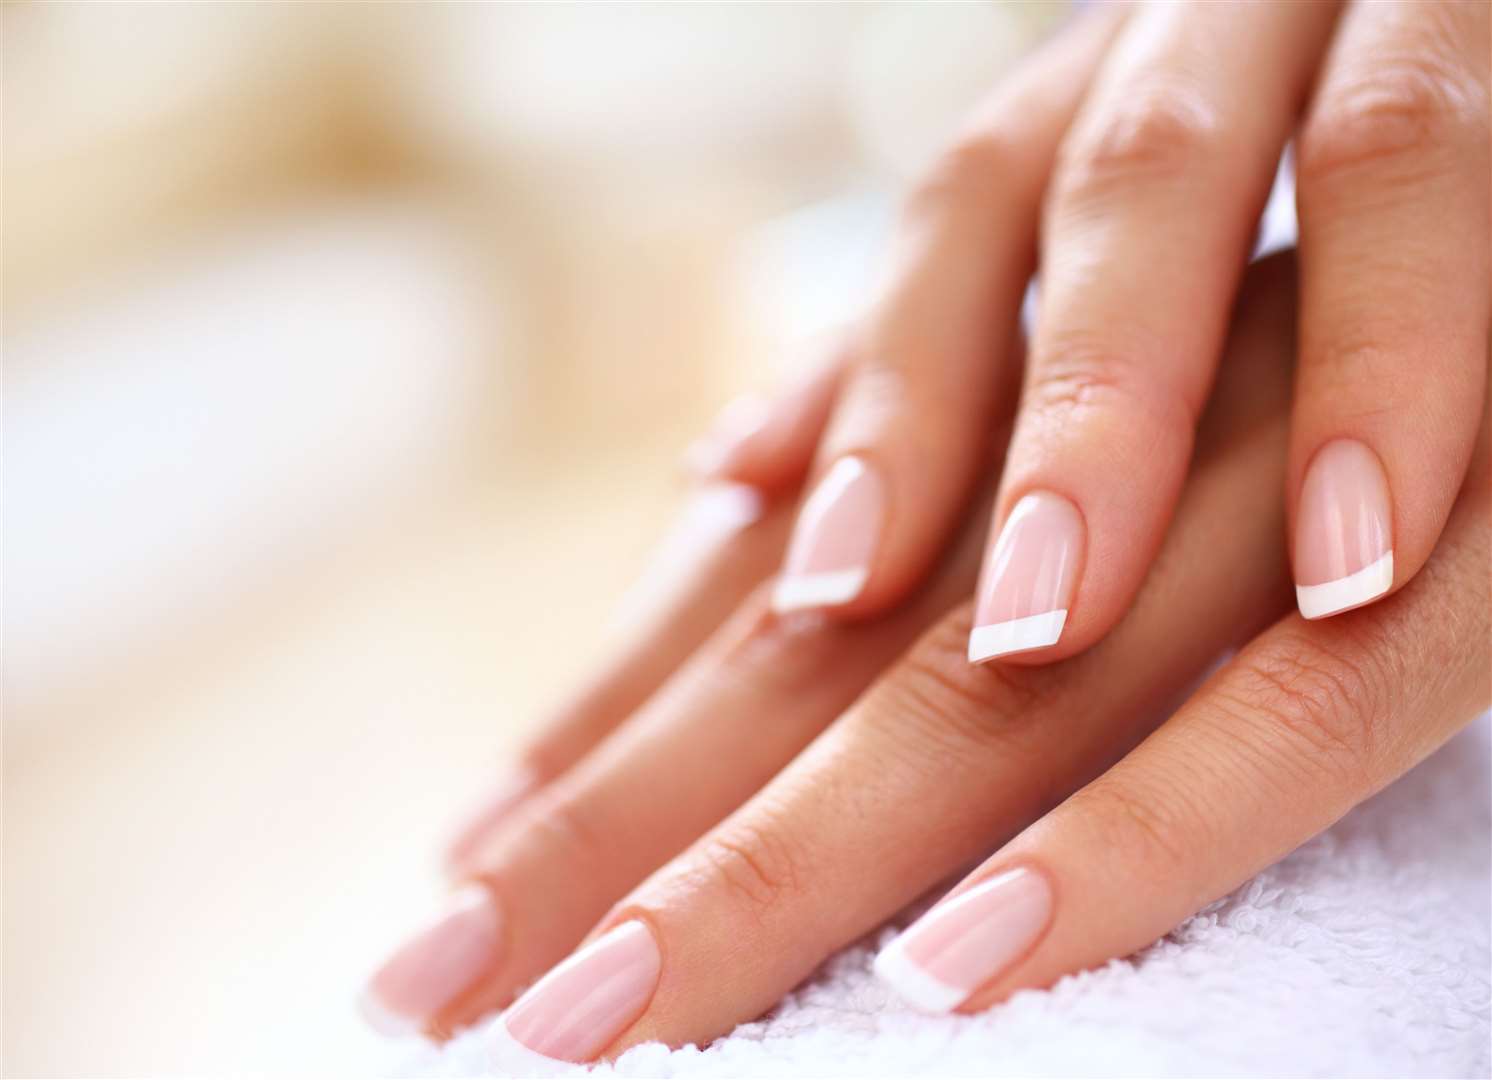 The salons are offering Thomas Cook employees with free treatments. Picture: iStock/Getty Images